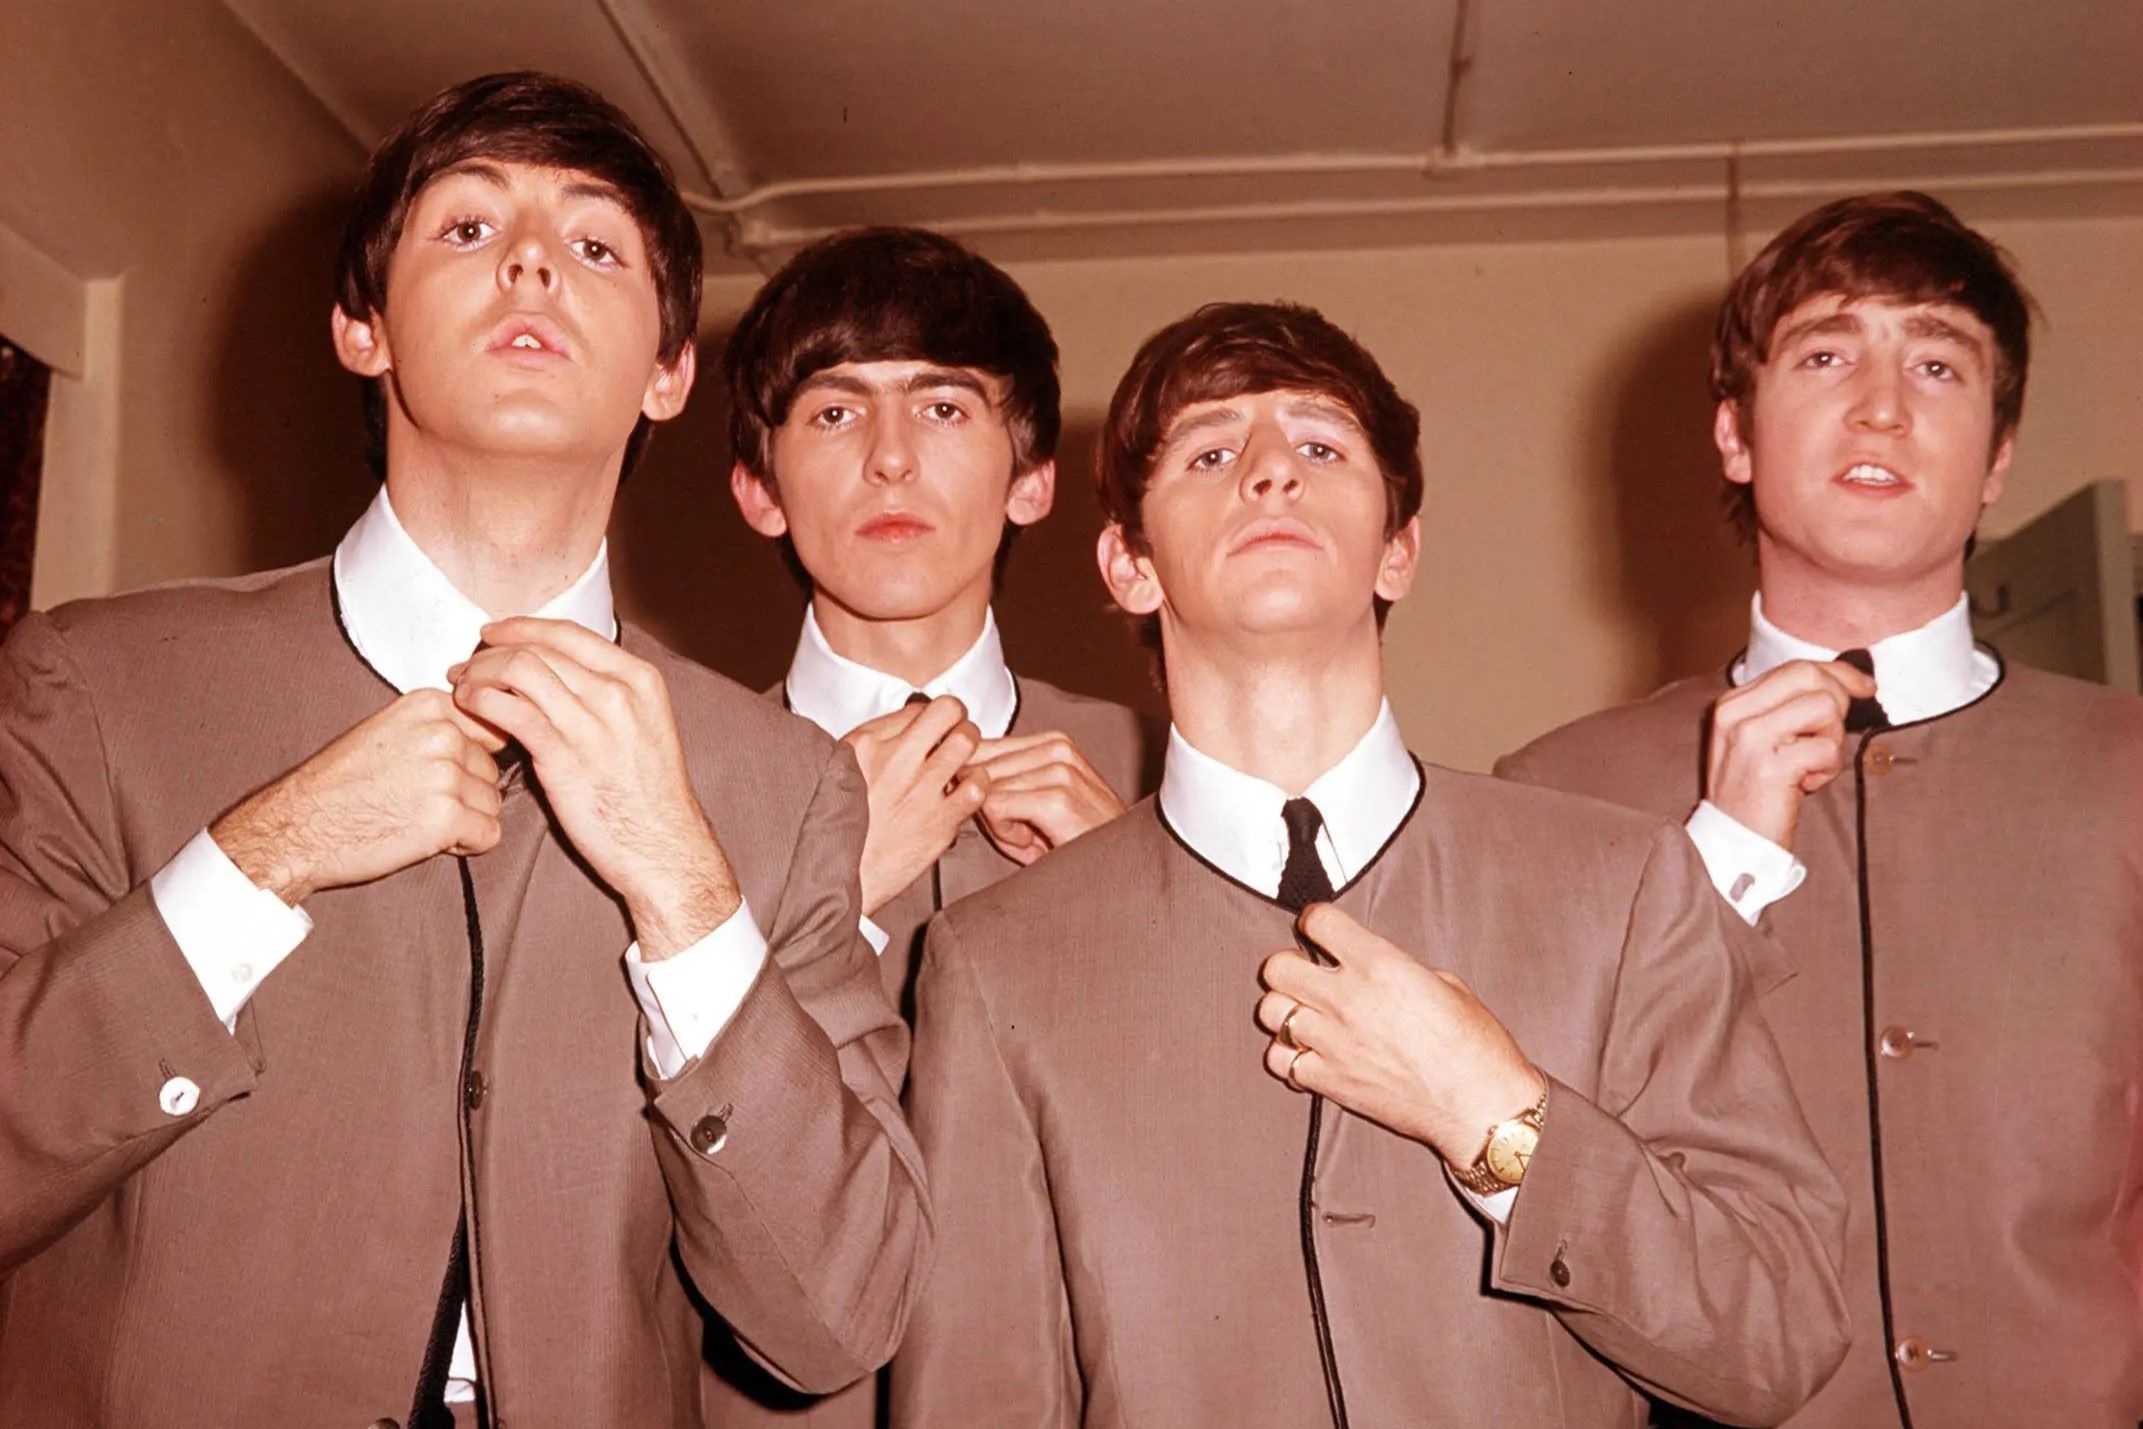 The Surprising Origin Of The Beatles’ “Billy Shears” Revealed!